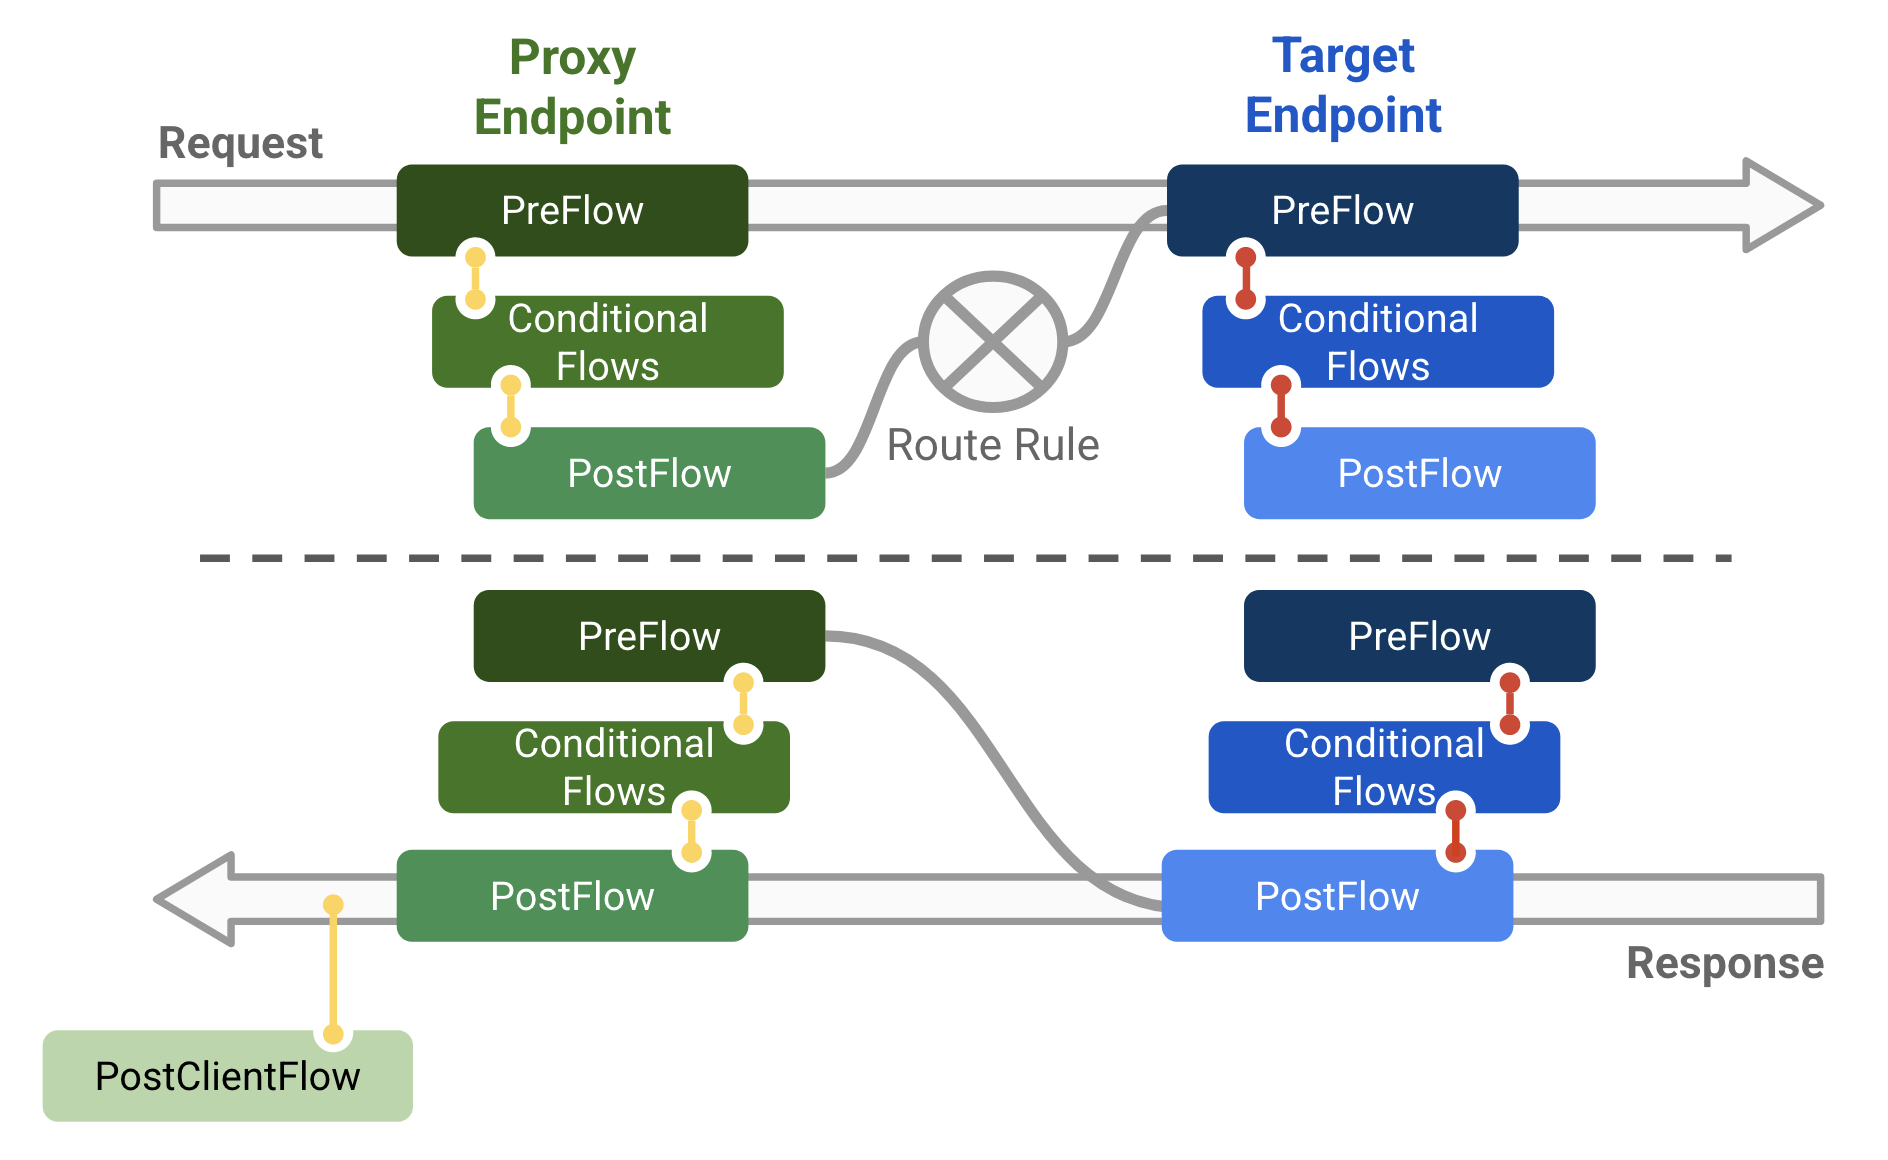 Flow of requests from the Proxy Endpoint to the Target Endpoint, and then the return of the responses back